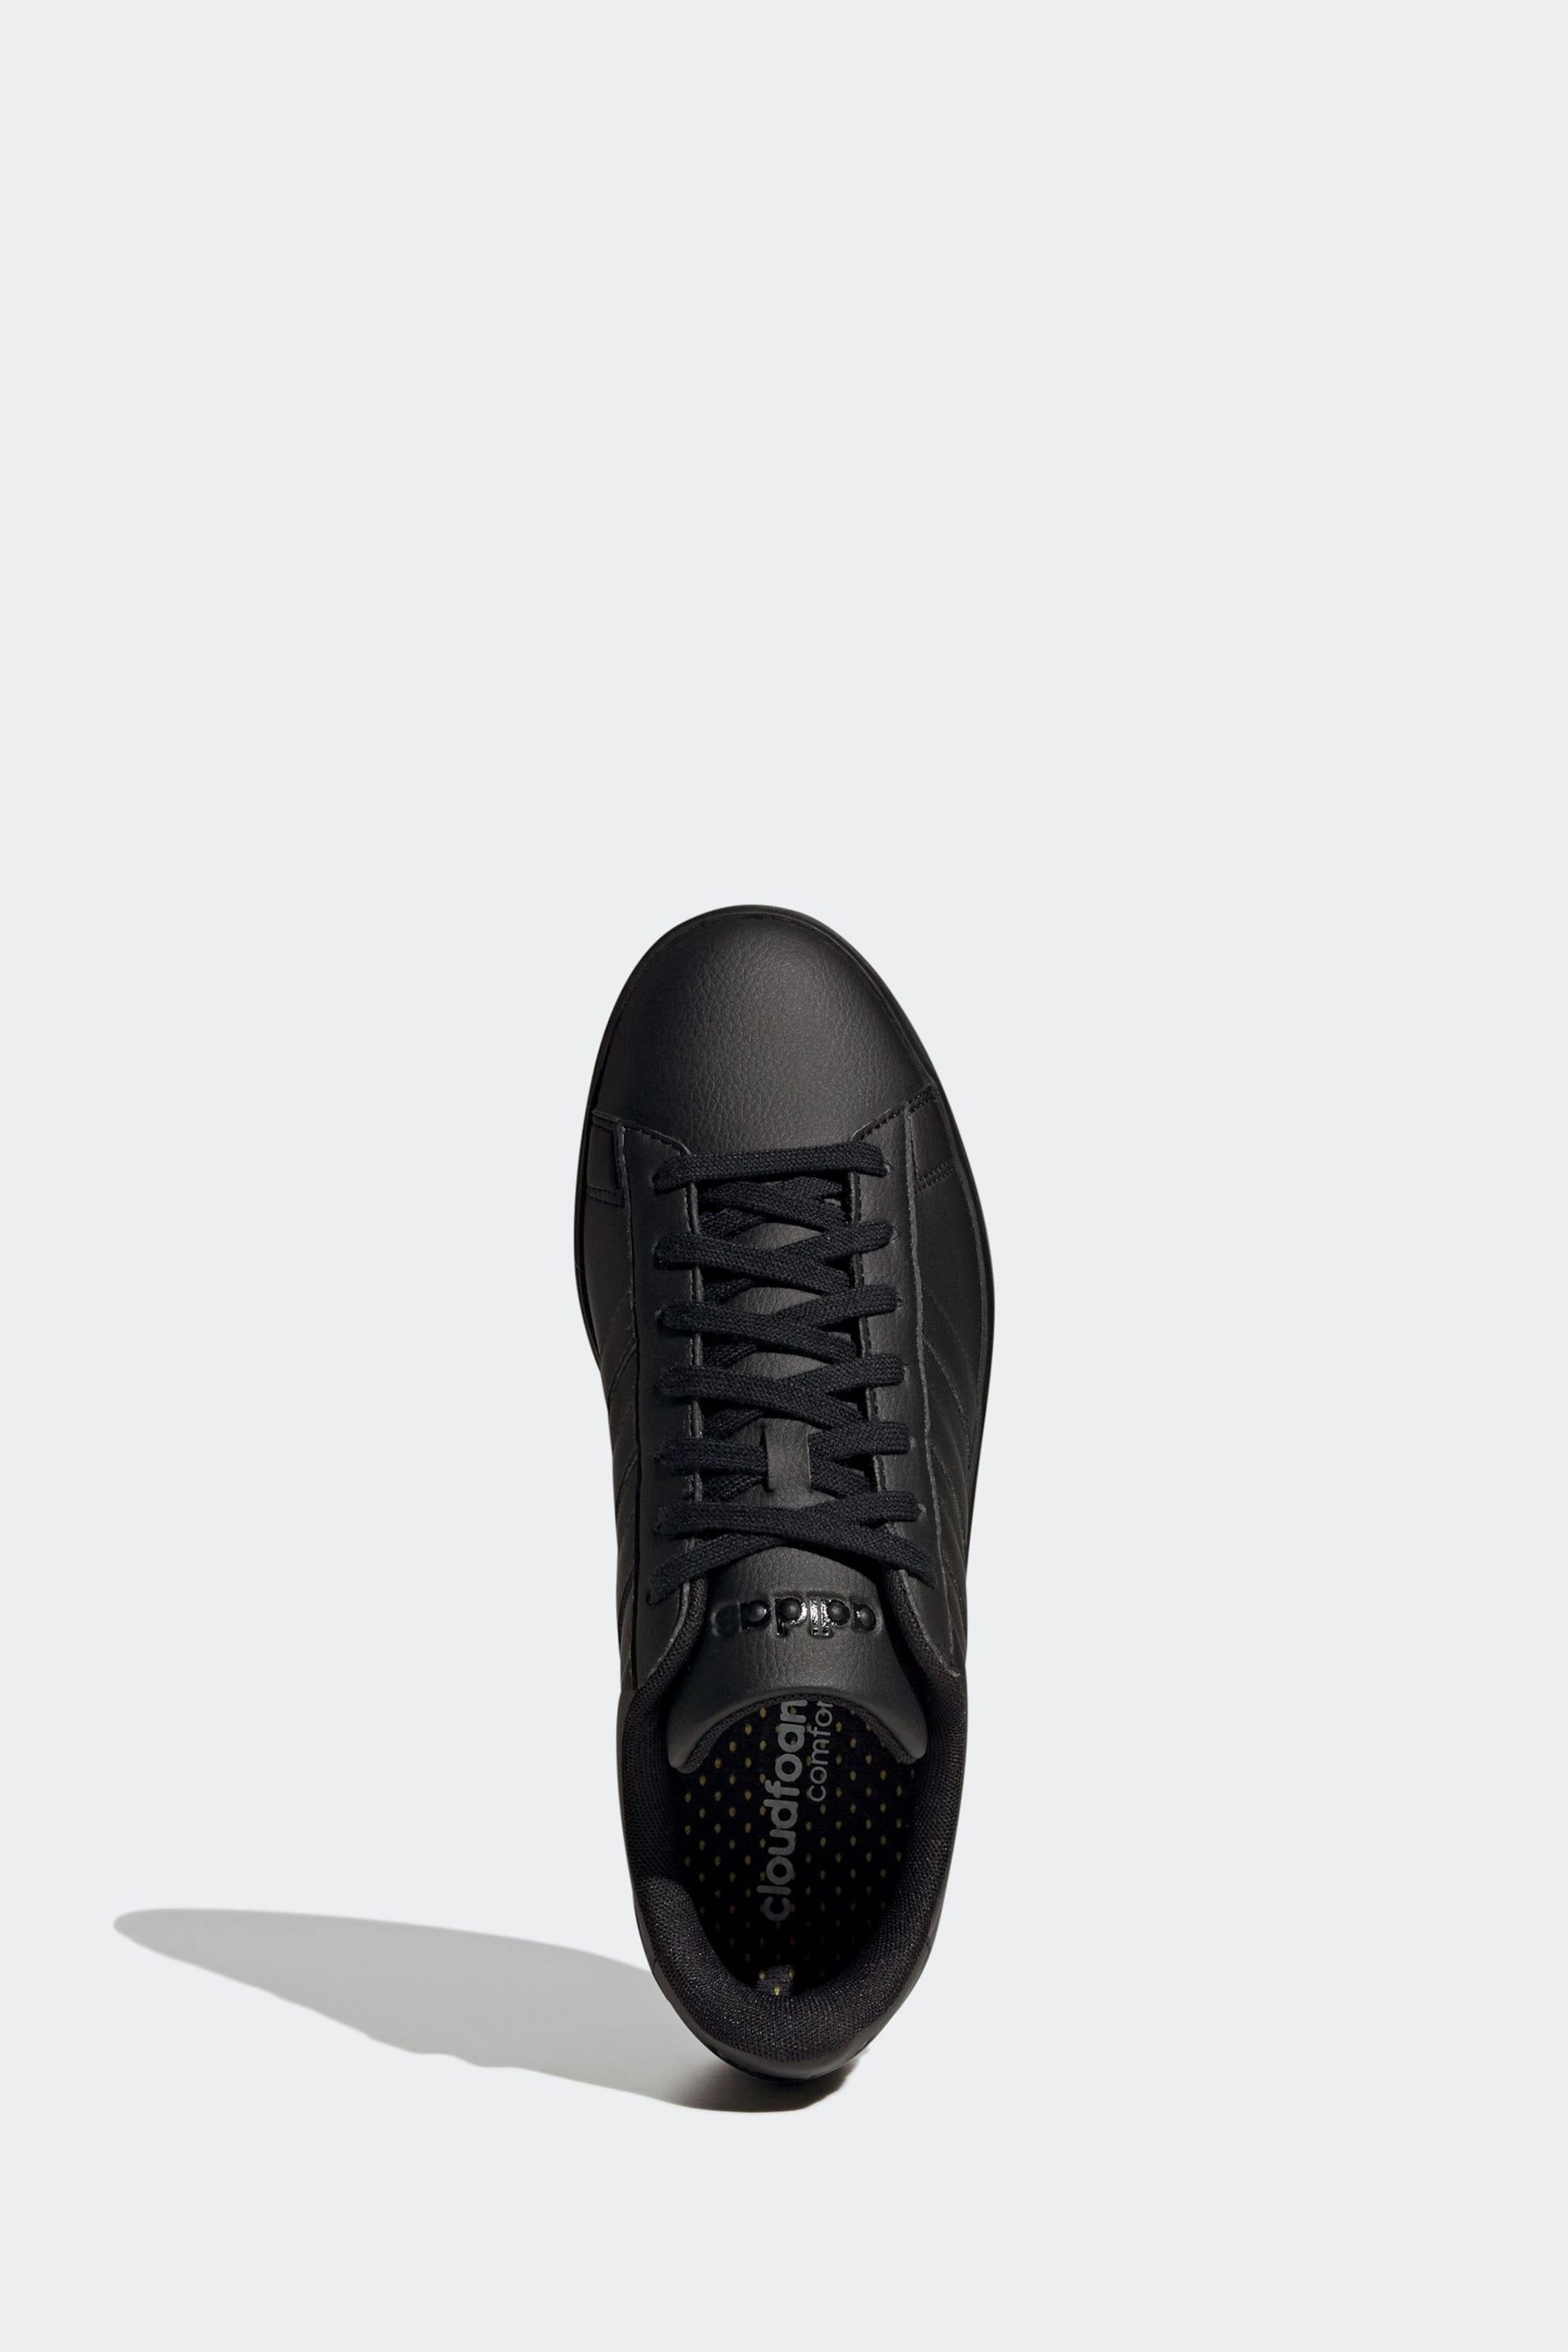 adidas Black Grand Court 2.0 Trainers - Image 6 of 9